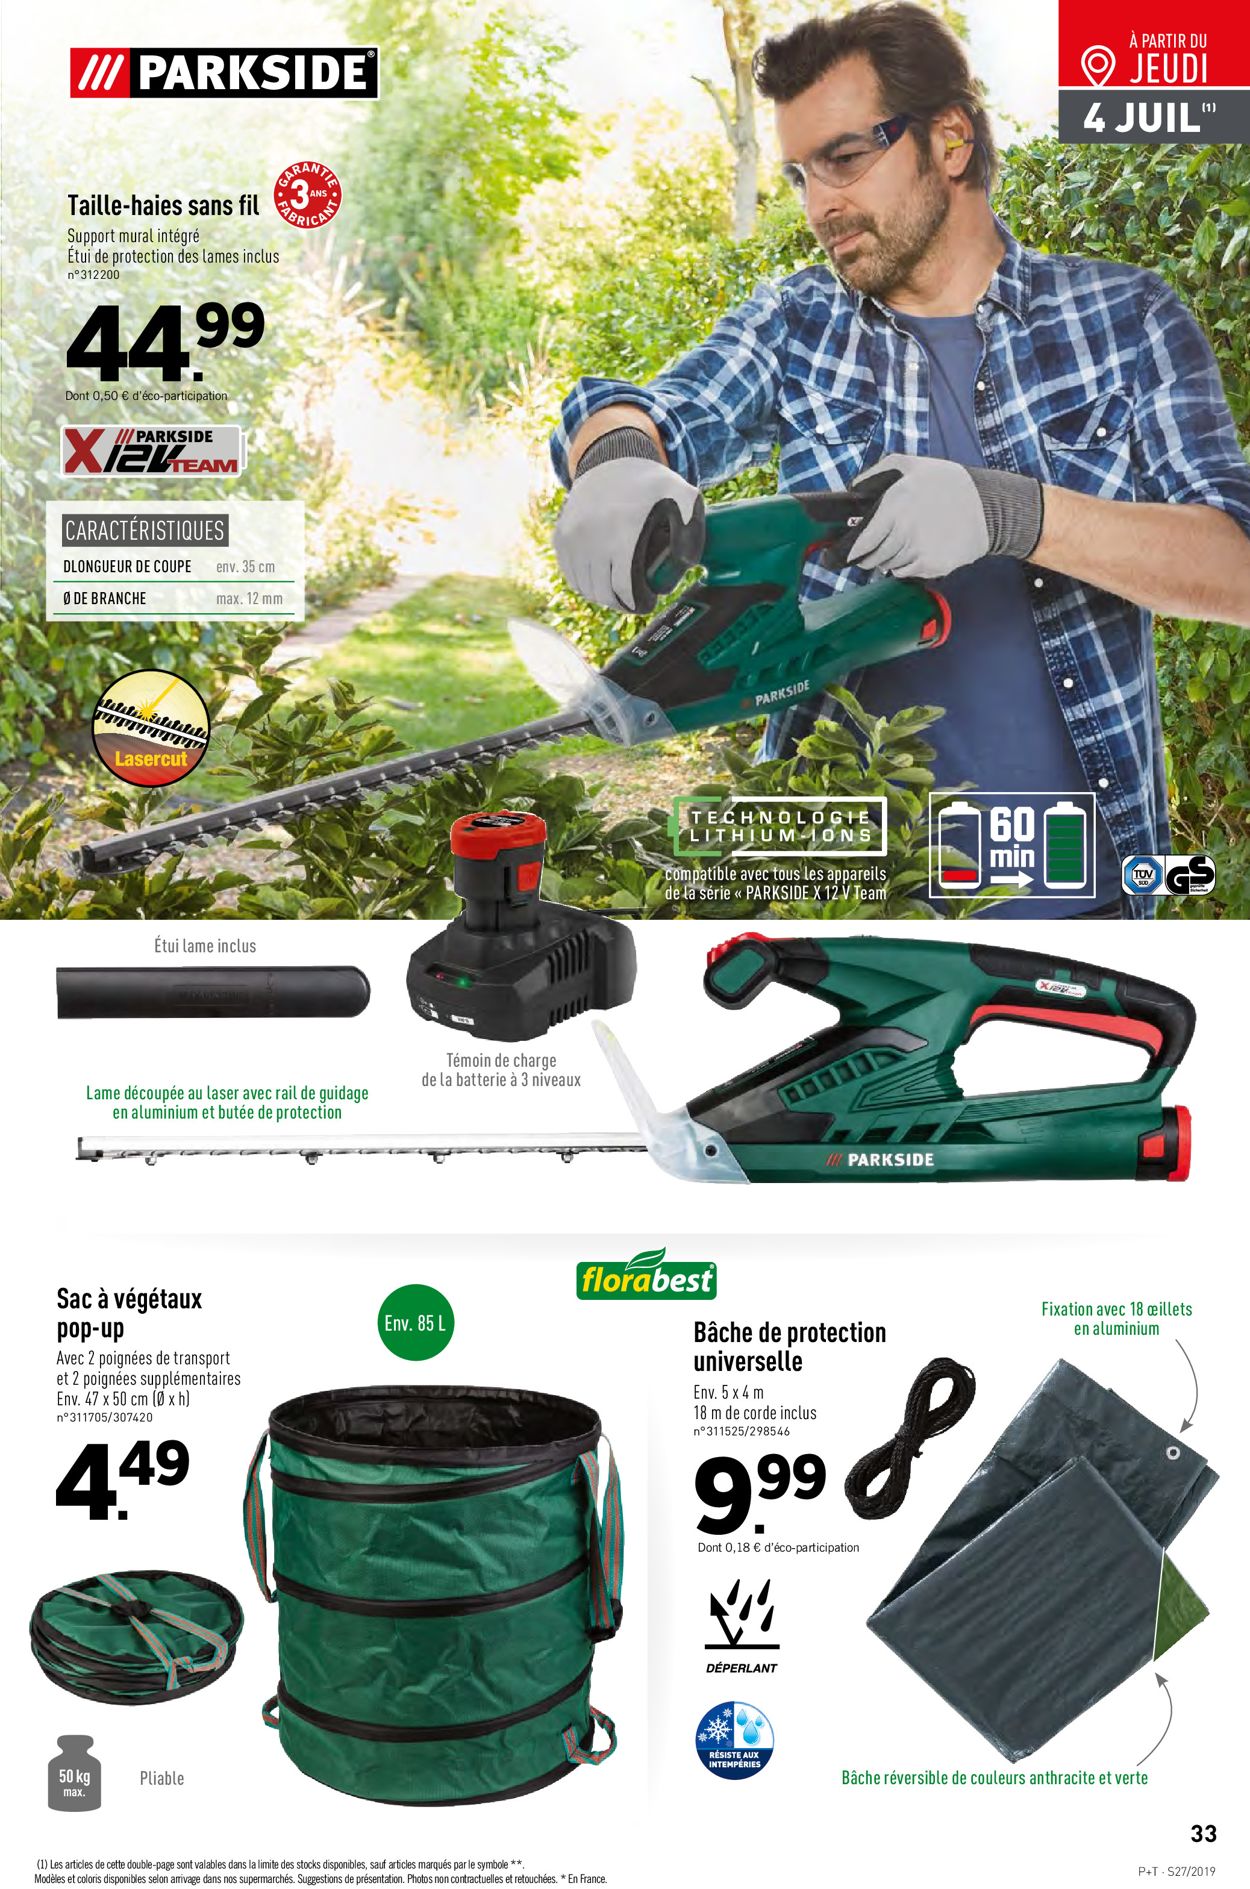 Lidl Catalogue - 03.07-09.07.2019 (Page 33)